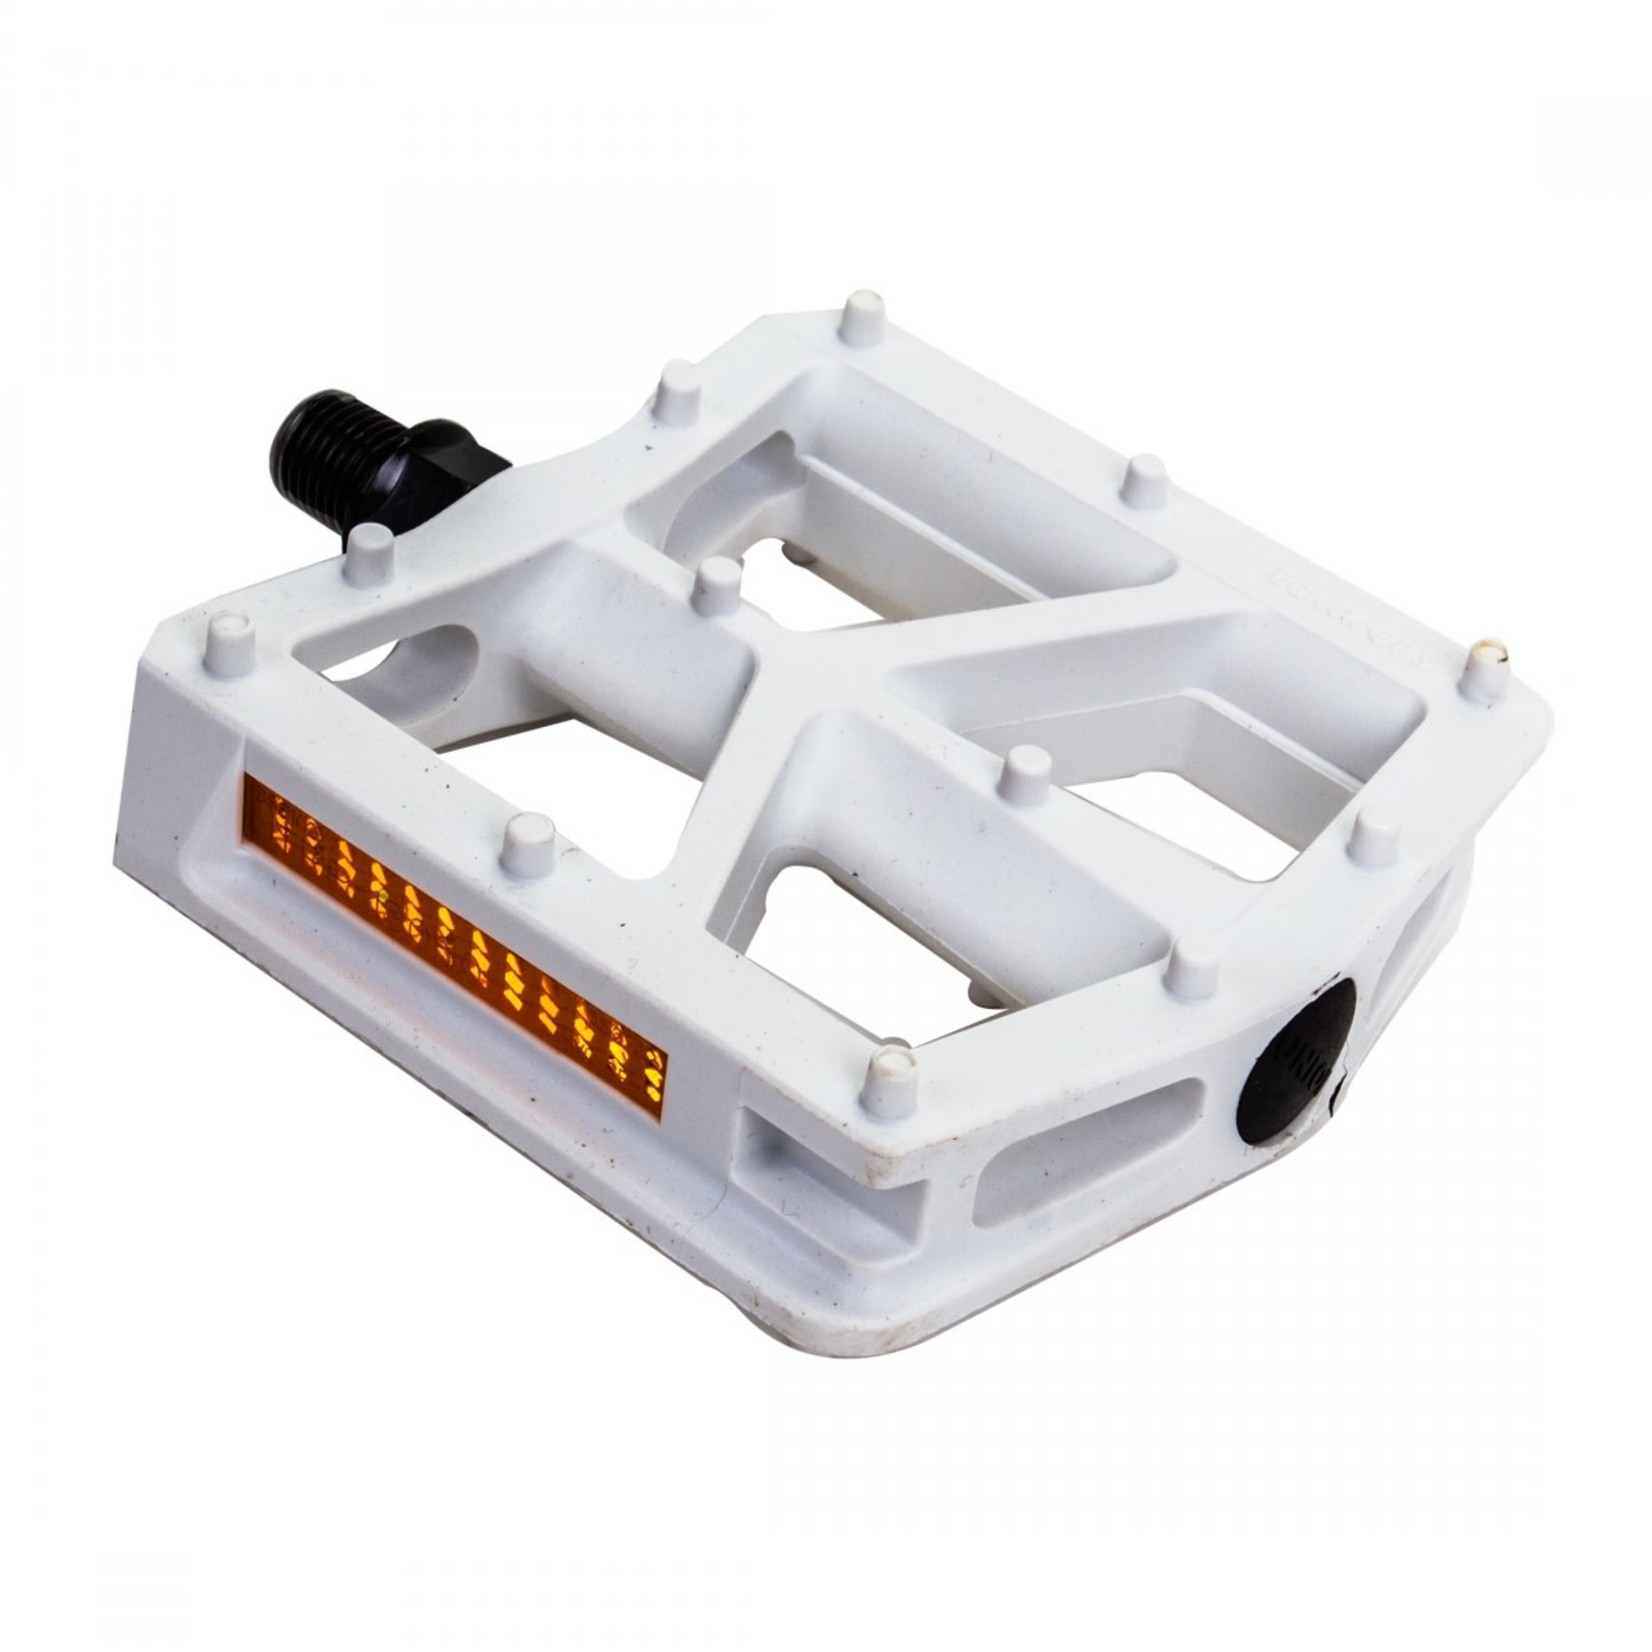 BLACK OPS Black Ops T-Bar Pedals, White, 1/2"